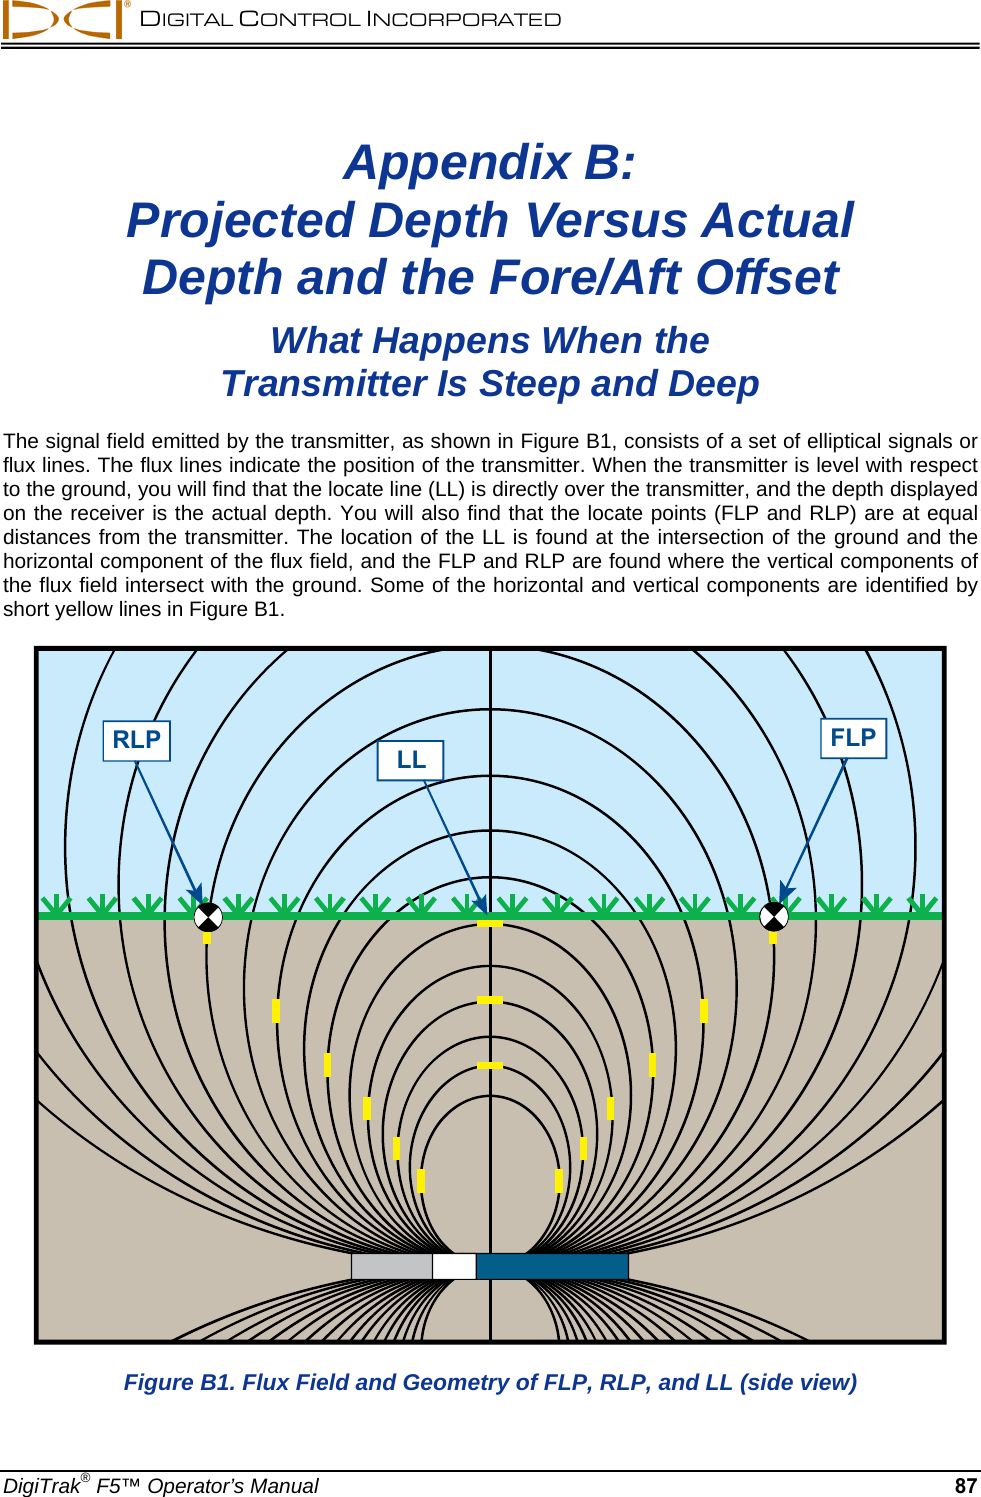  DIGITAL CONTROL INCORPORATED  DigiTrak® F5™ Operator’s Manual 87 Appendix B: Projected Depth Versus Actual Depth and the Fore/Aft Offset  What Happens When the  Transmitter Is Steep and Deep The signal field emitted by the transmitter, as shown in Figure B1, consists of a set of elliptical signals or flux lines. The flux lines indicate the position of the transmitter. When the transmitter is level with respect to the ground, you will find that the locate line (LL) is directly over the transmitter, and the depth displayed on the receiver is the actual depth. You will also find that the locate points (FLP and RLP) are at equal distances from the transmitter. The location of the LL is found at the intersection of the ground and the horizontal component of the flux field, and the FLP and RLP are found where the vertical components of the flux field intersect with the ground. Some of the horizontal and vertical components are identified by short yellow lines in Figure B1. RLP FLPLL Figure B1. Flux Field and Geometry of FLP, RLP, and LL (side view) 